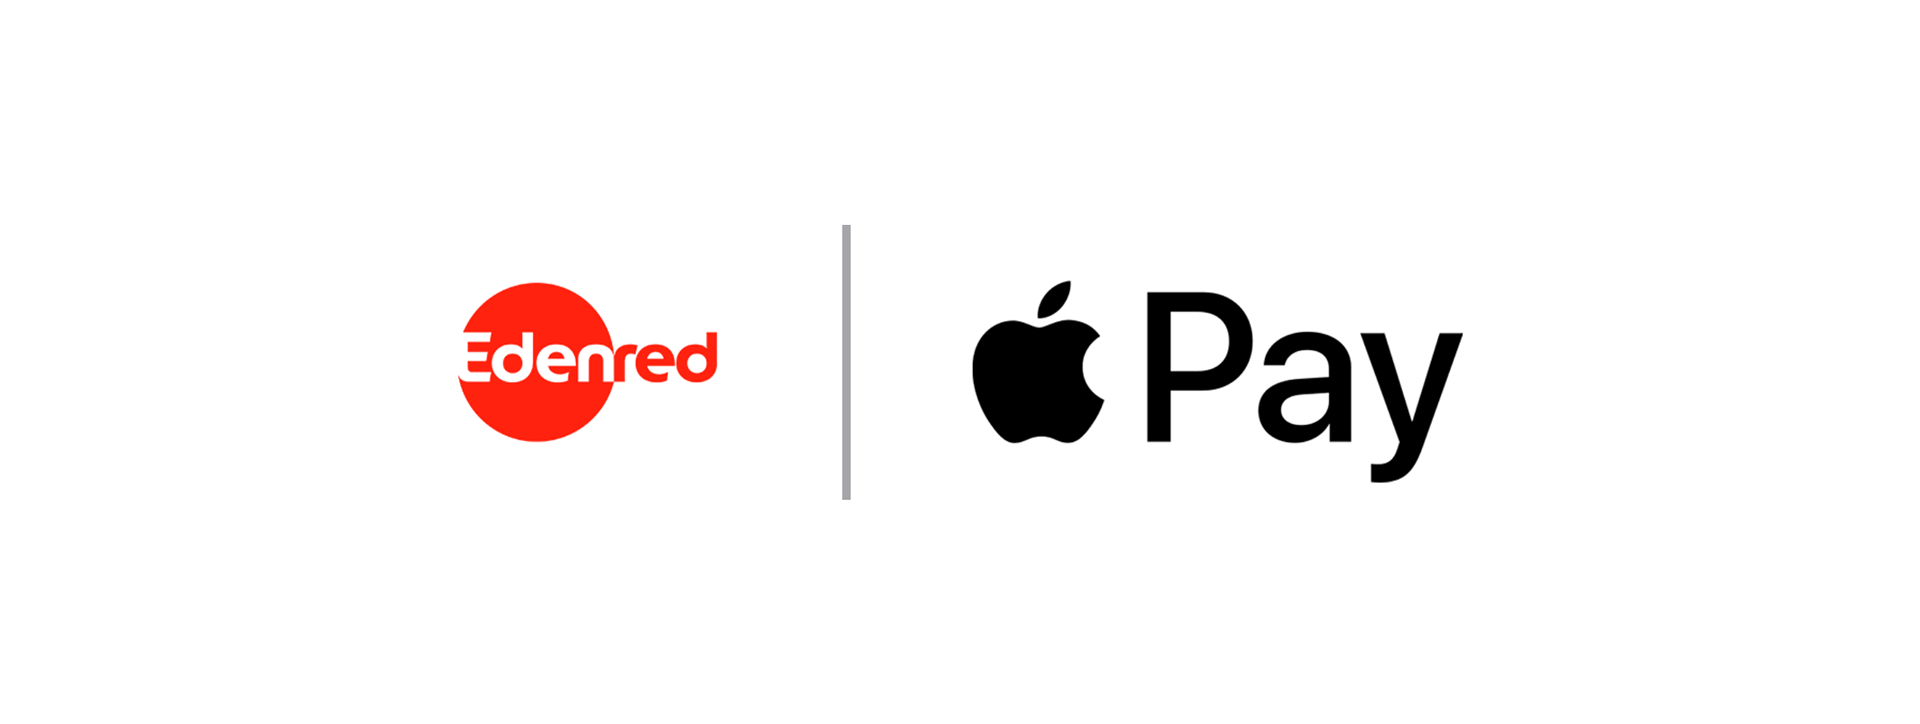 Edenred brings all benefits to Apple Pay